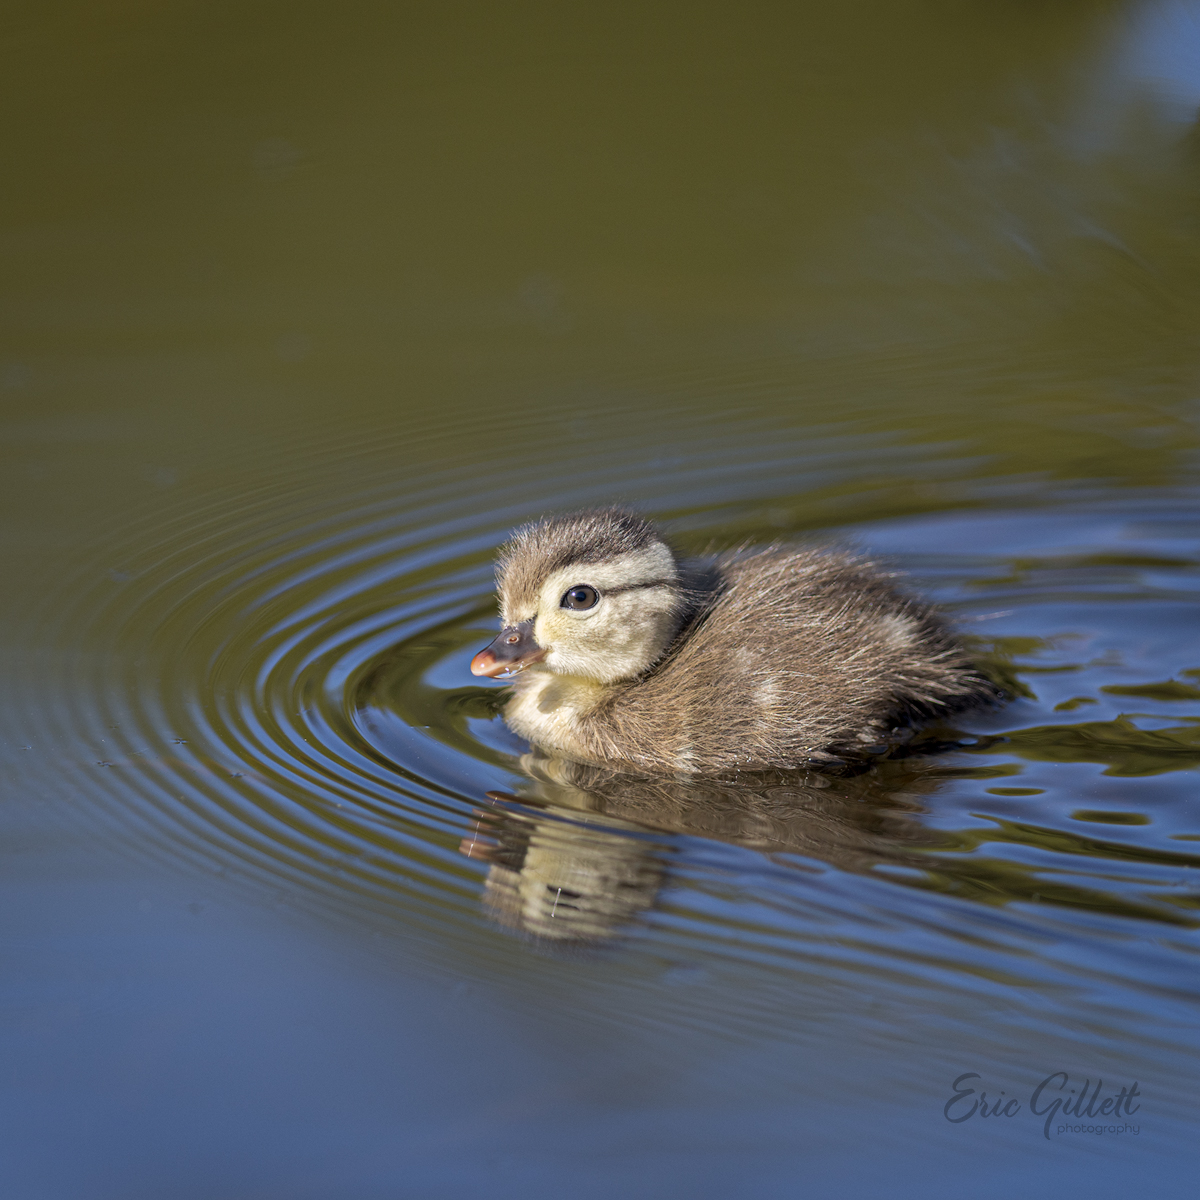 First new Wood Ducklings our our local pond. 😲

#WoodDuckWednesday

One of 9 new little ones in this family‼️

#birdphotography 
#birding